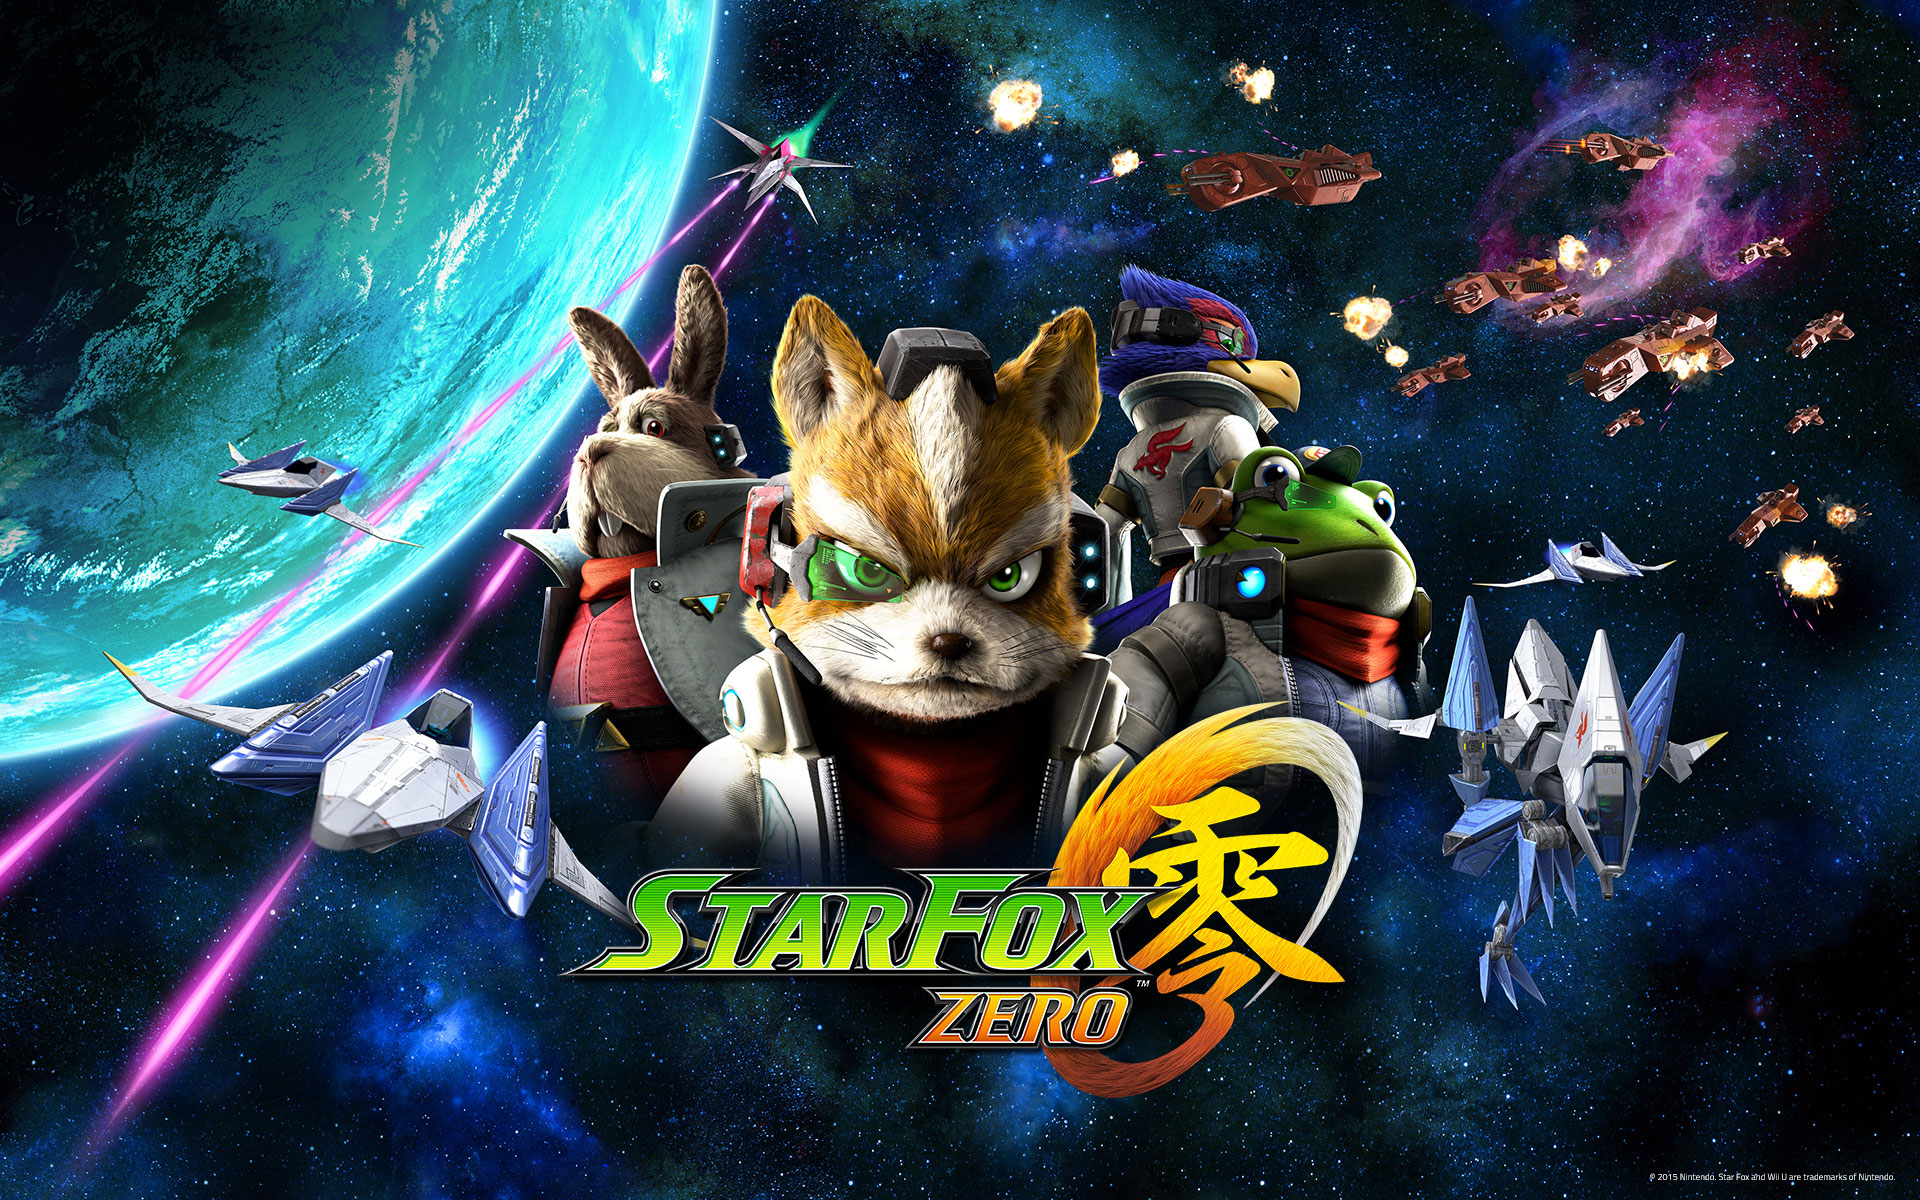 Interview with the Star Fox voice actors